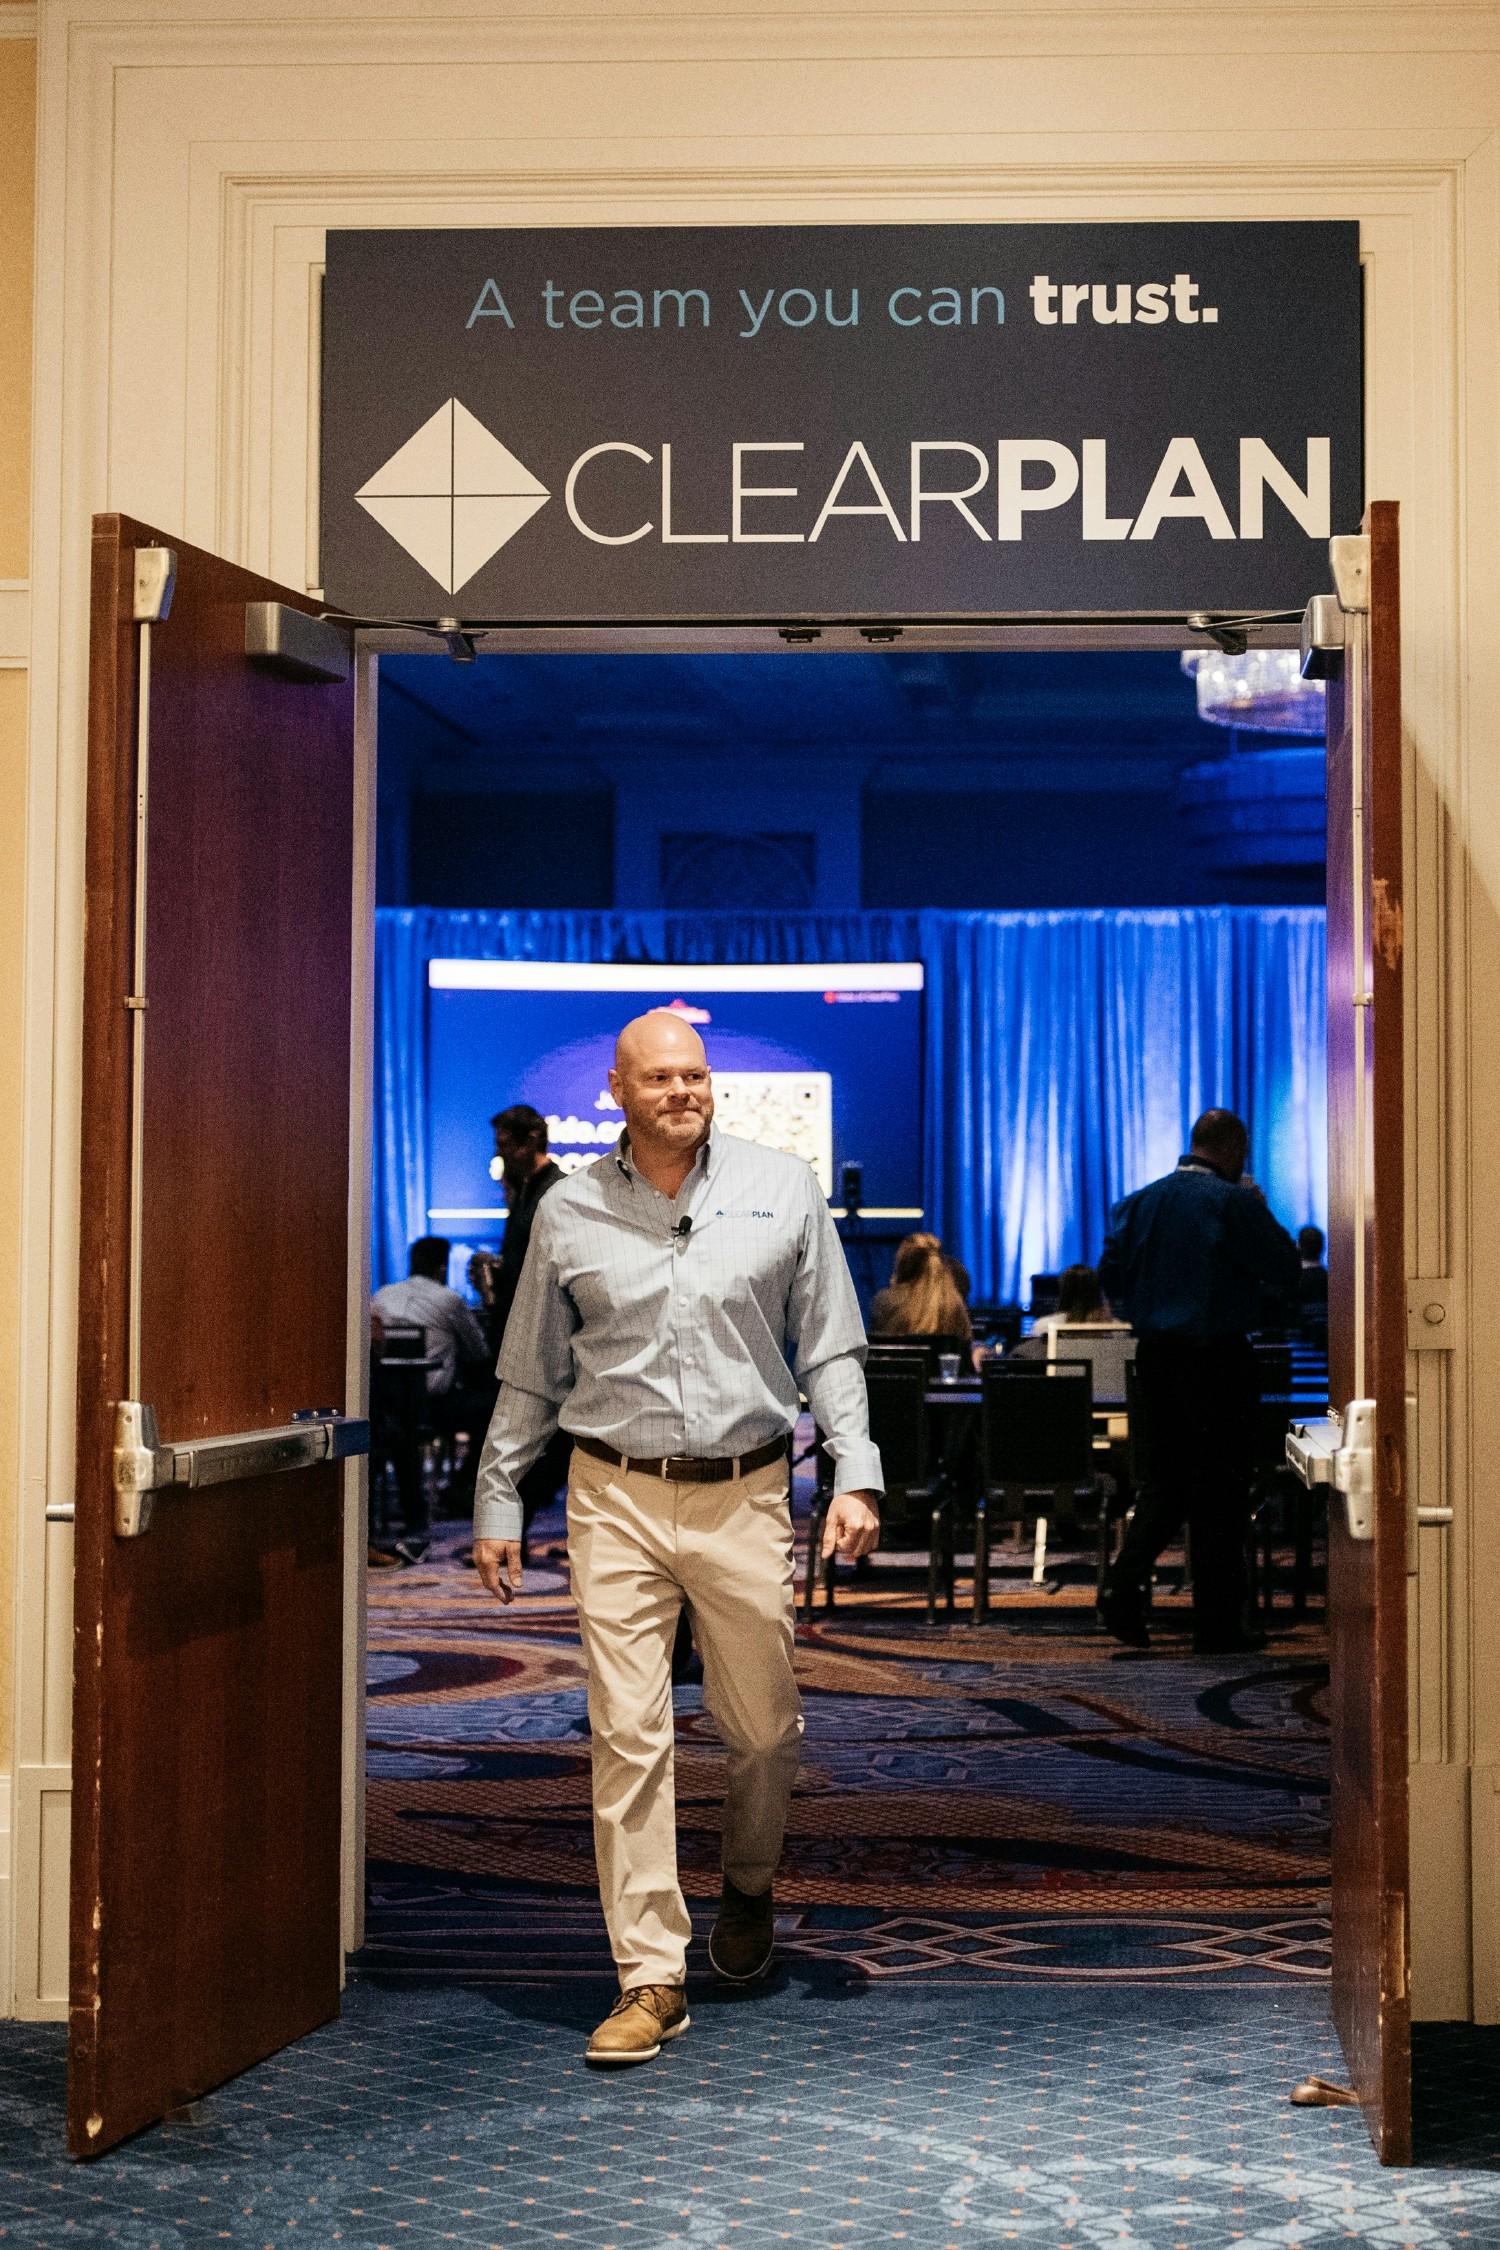 This picture says it all: ClearPlan is a team you can TRUST!